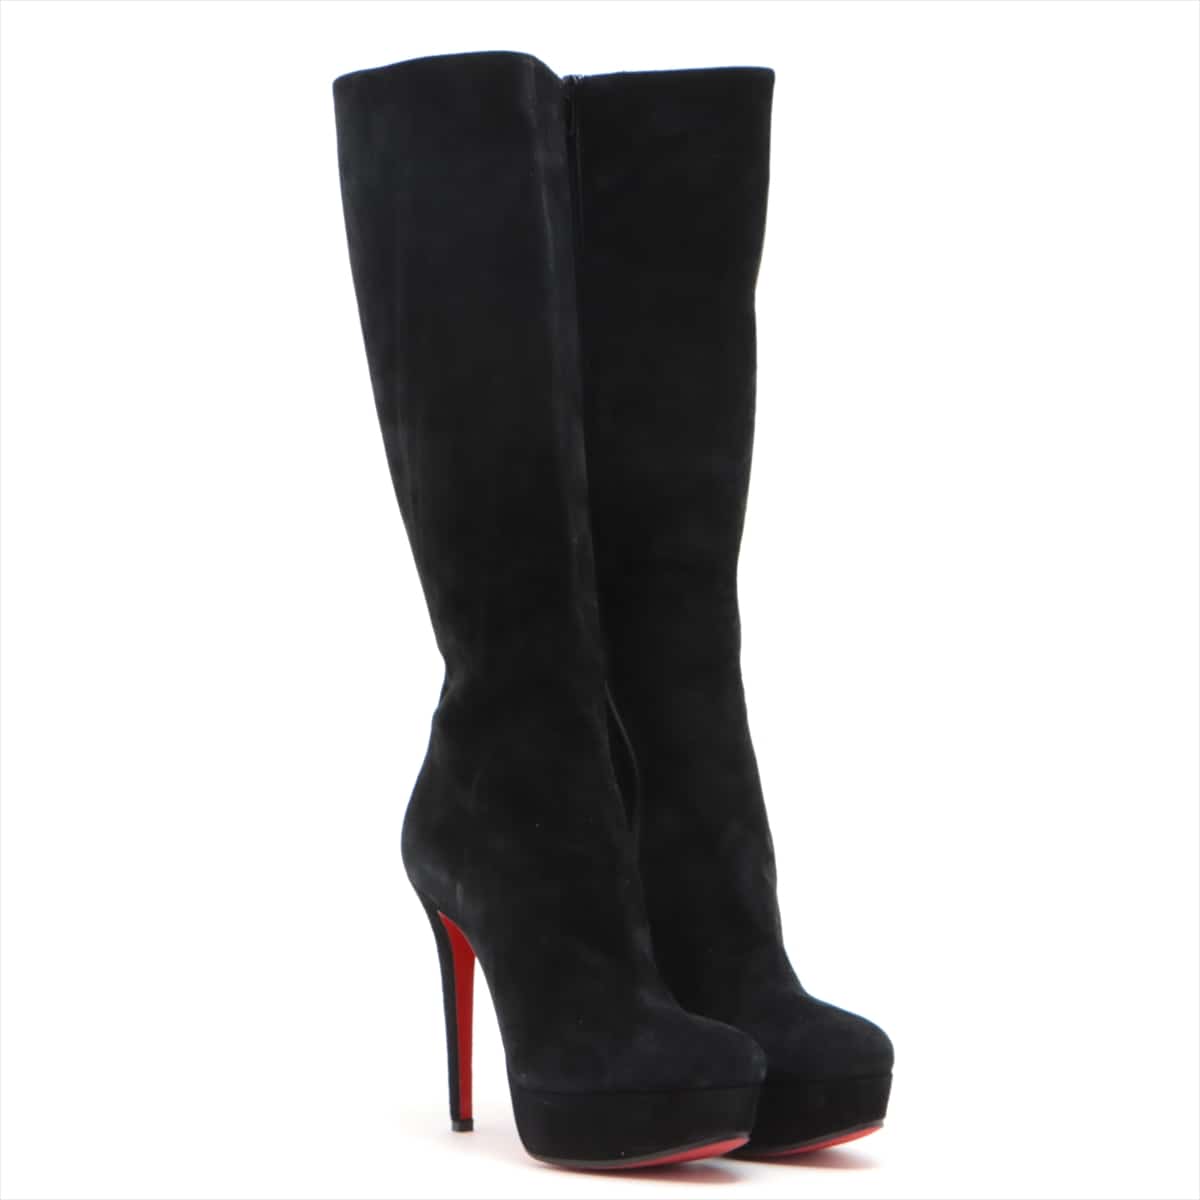 Christian Louboutin Suede Long boots 36 1/2 Ladies' Black There are threads and fraying in various places